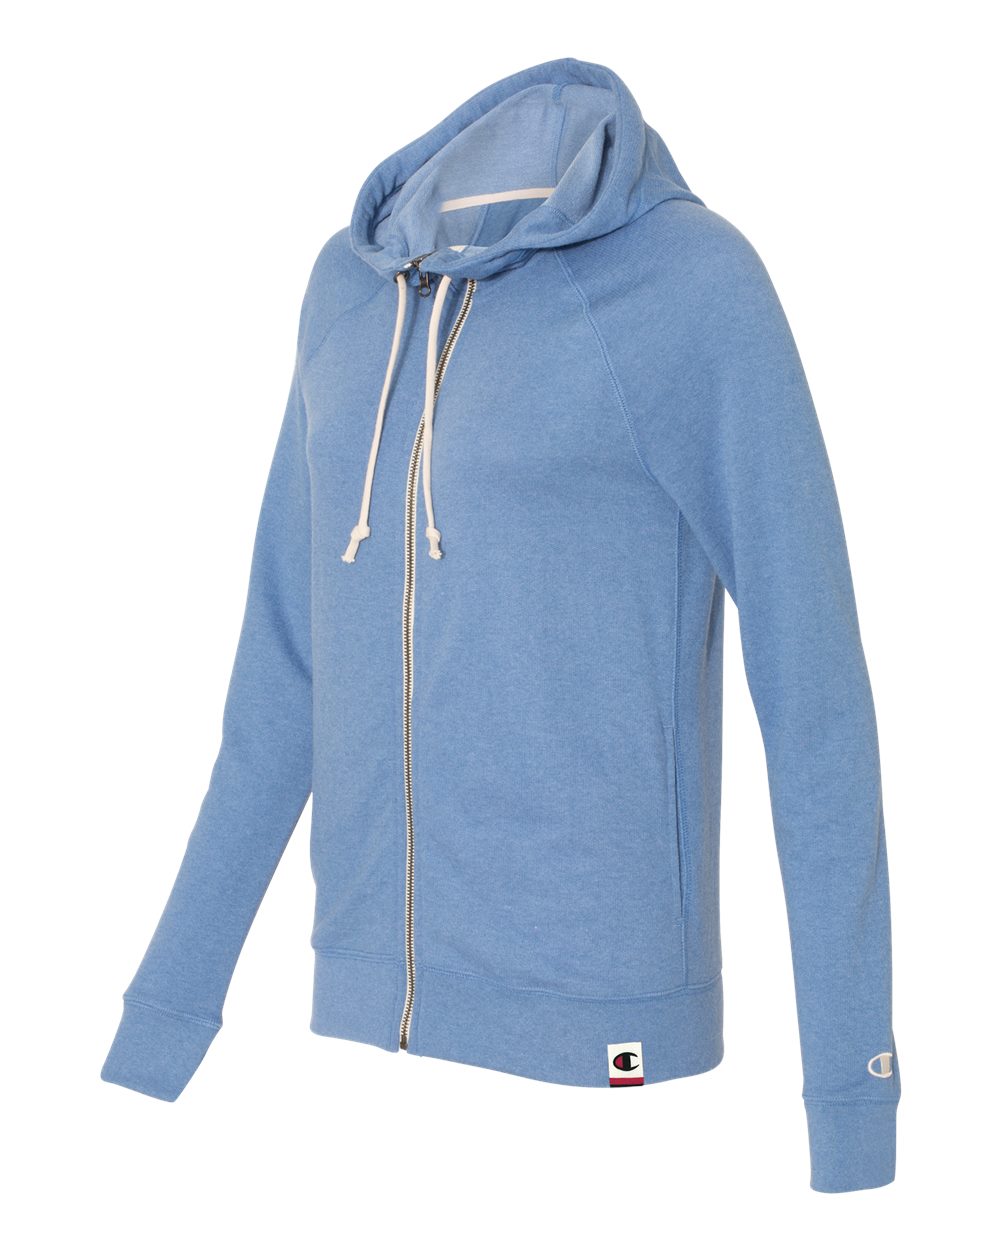 Champion AO650 - Authentic Originals Women's French Terry Hooded Full-Zip